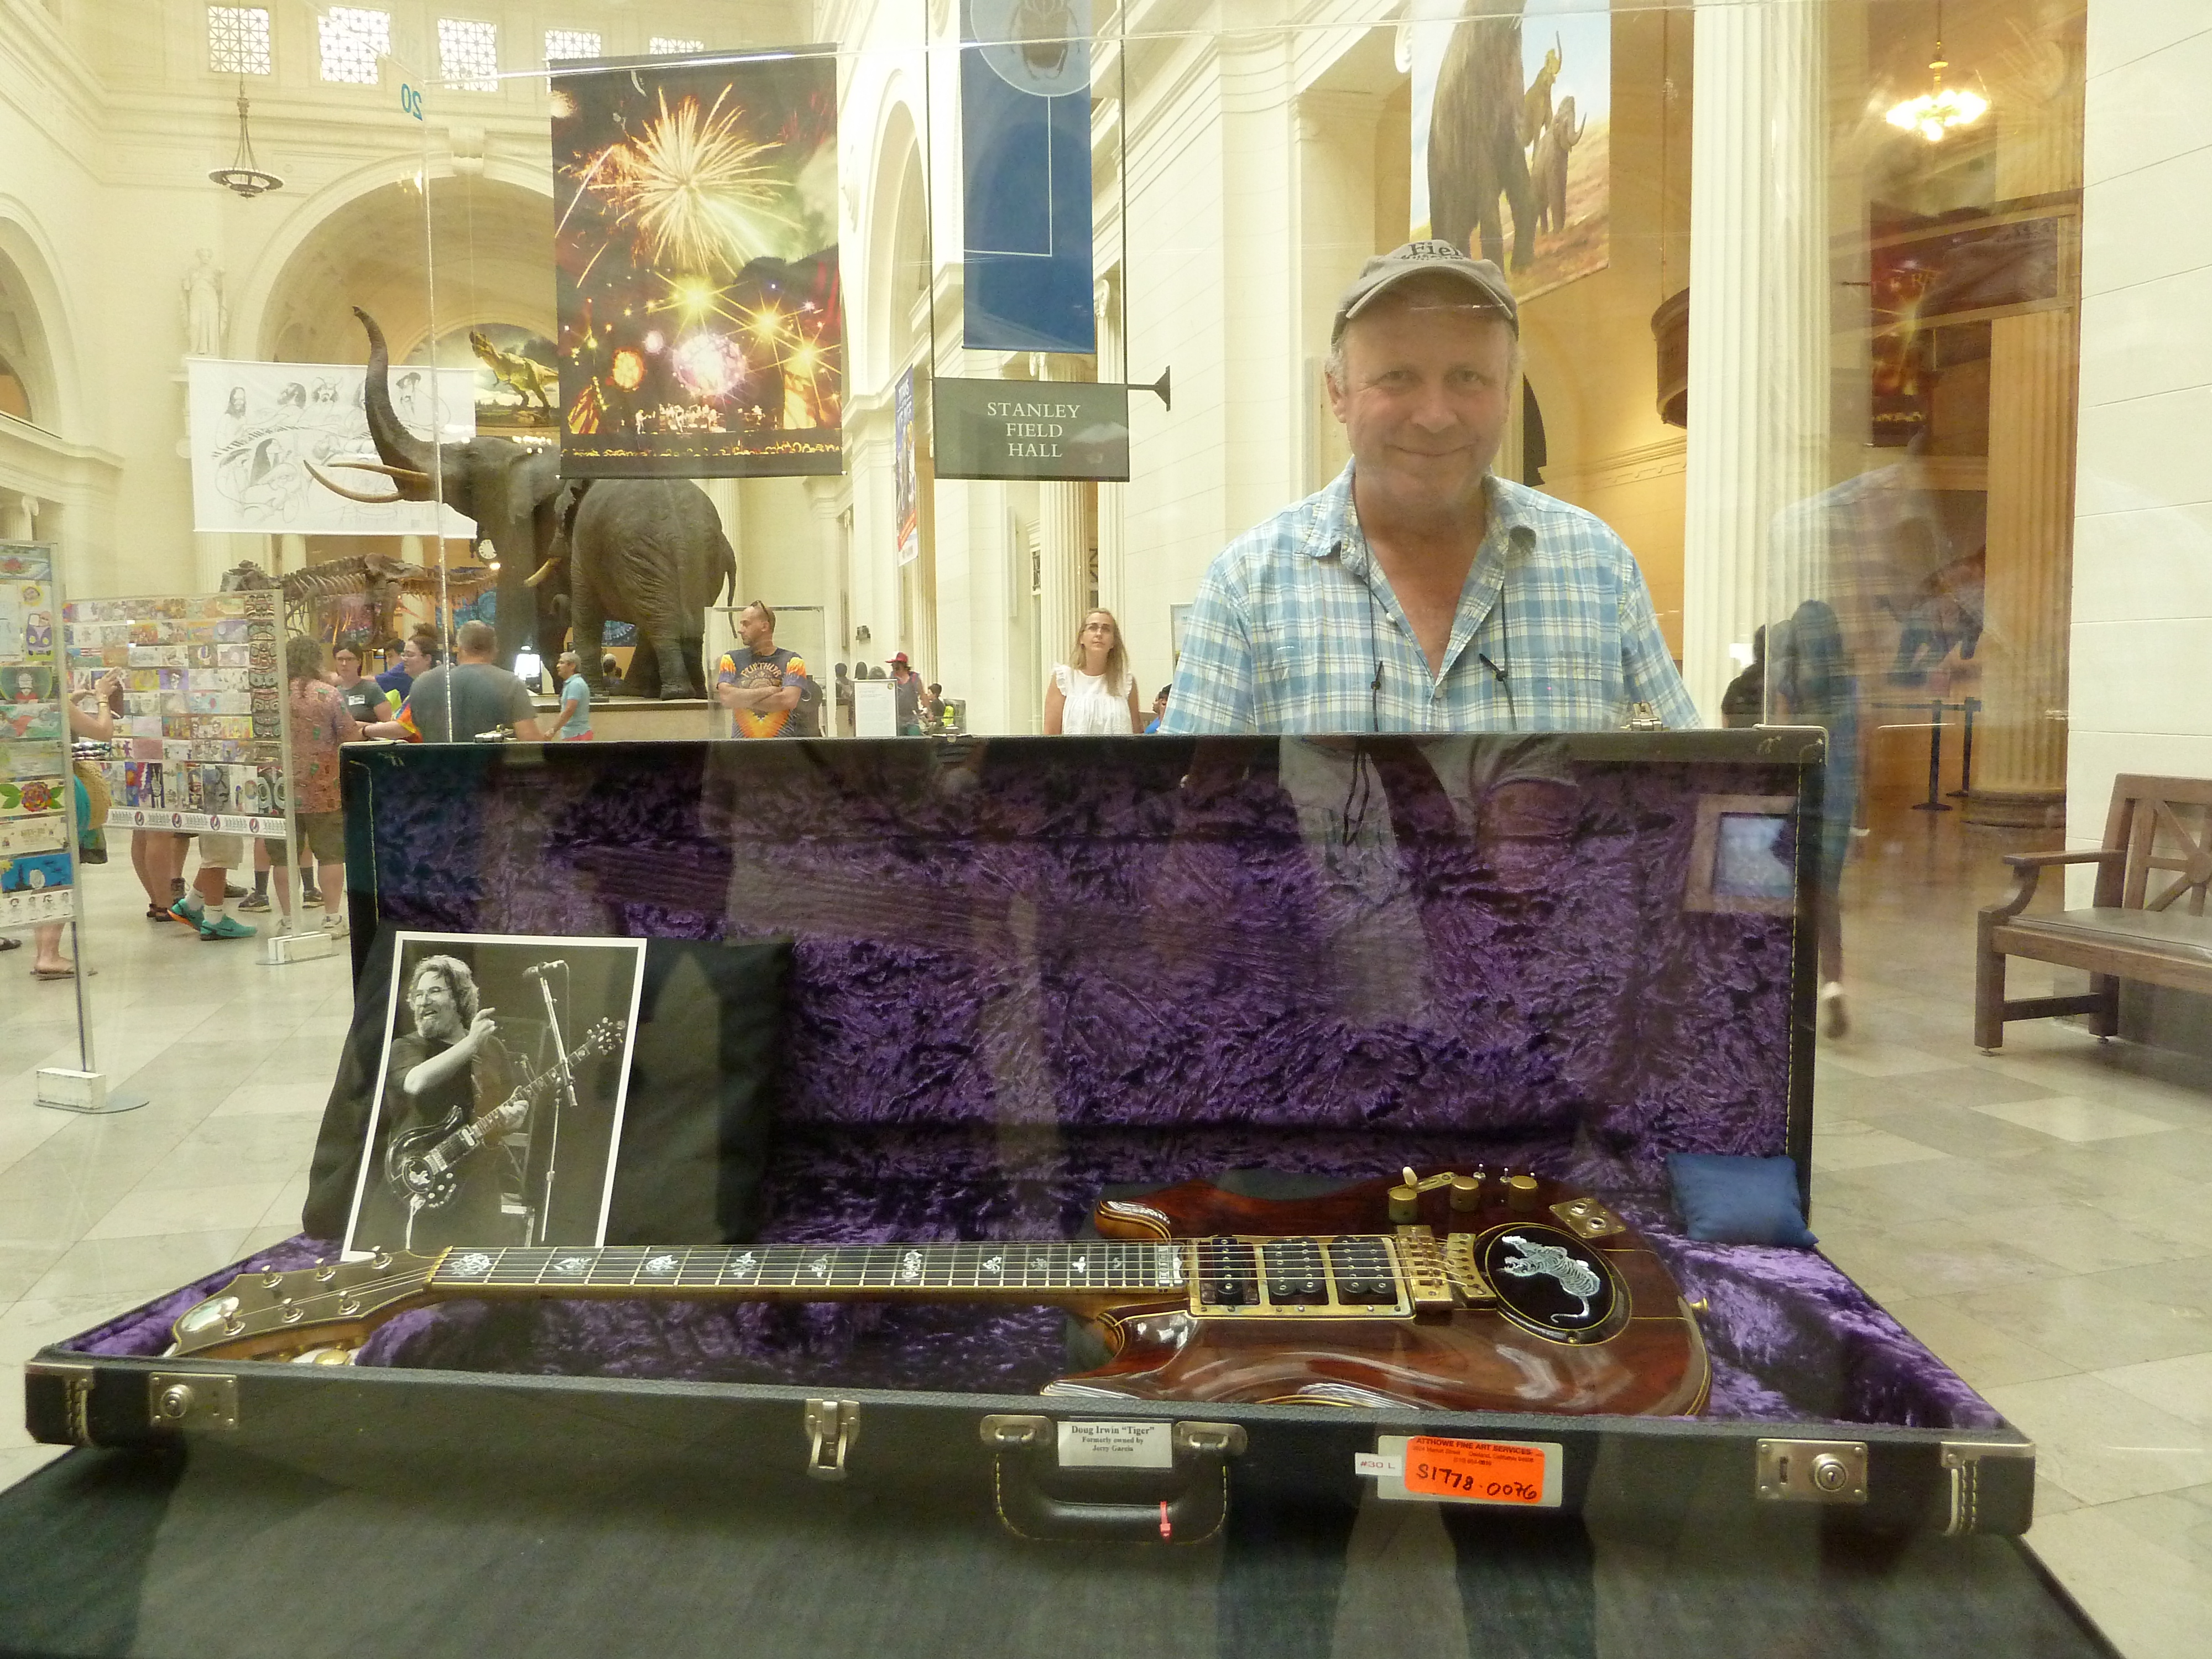 Bill basks in the aura of Jerry Garcia’s guitar, “Tiger,” which, with other items from the Grateful Dead archive, were displayed at The Field Museum in parallel with three Dead concerts held across the street at Soldier Field in July 2015. Bill happily attended all three shows, having received every ticket he requested. He estimated his total Dead show attendance at more than 100. Courtesy of Mary Anne Rogers.